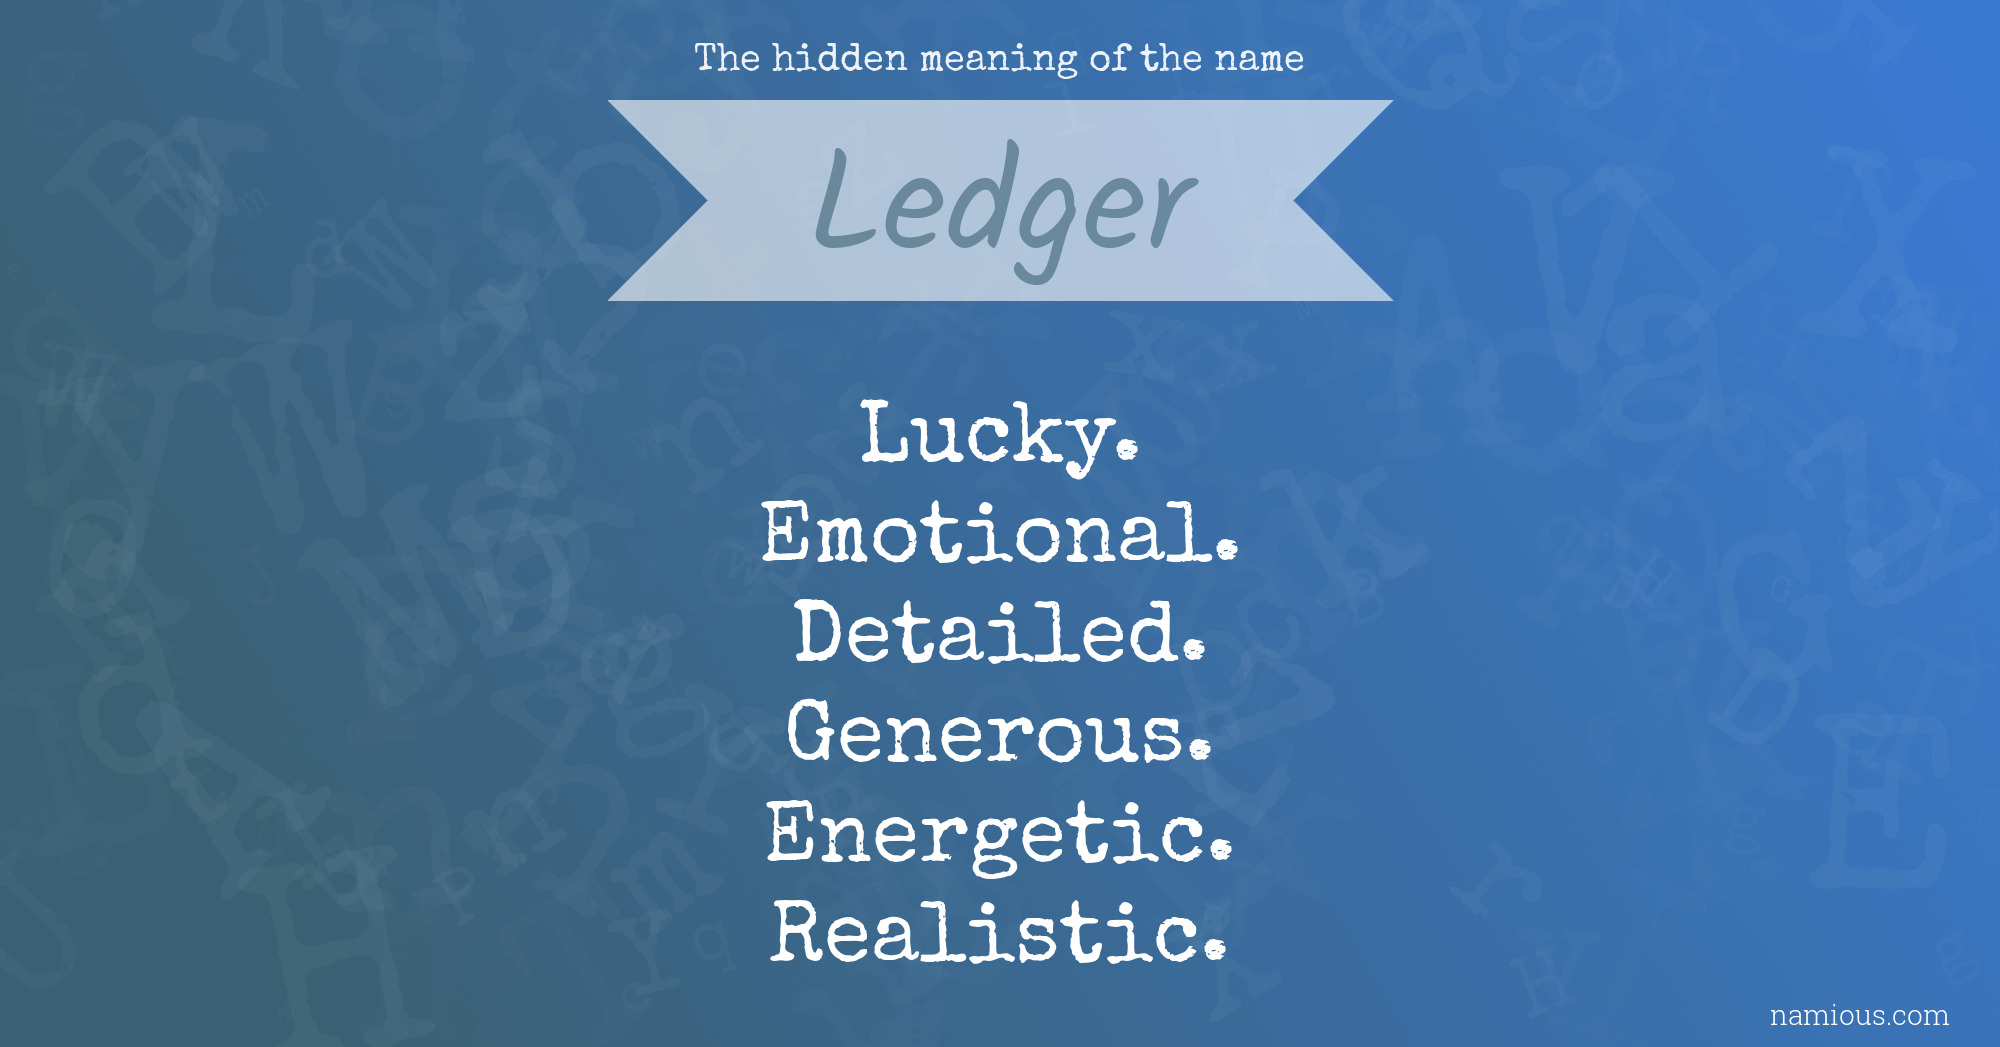 The hidden meaning of the name Ledger